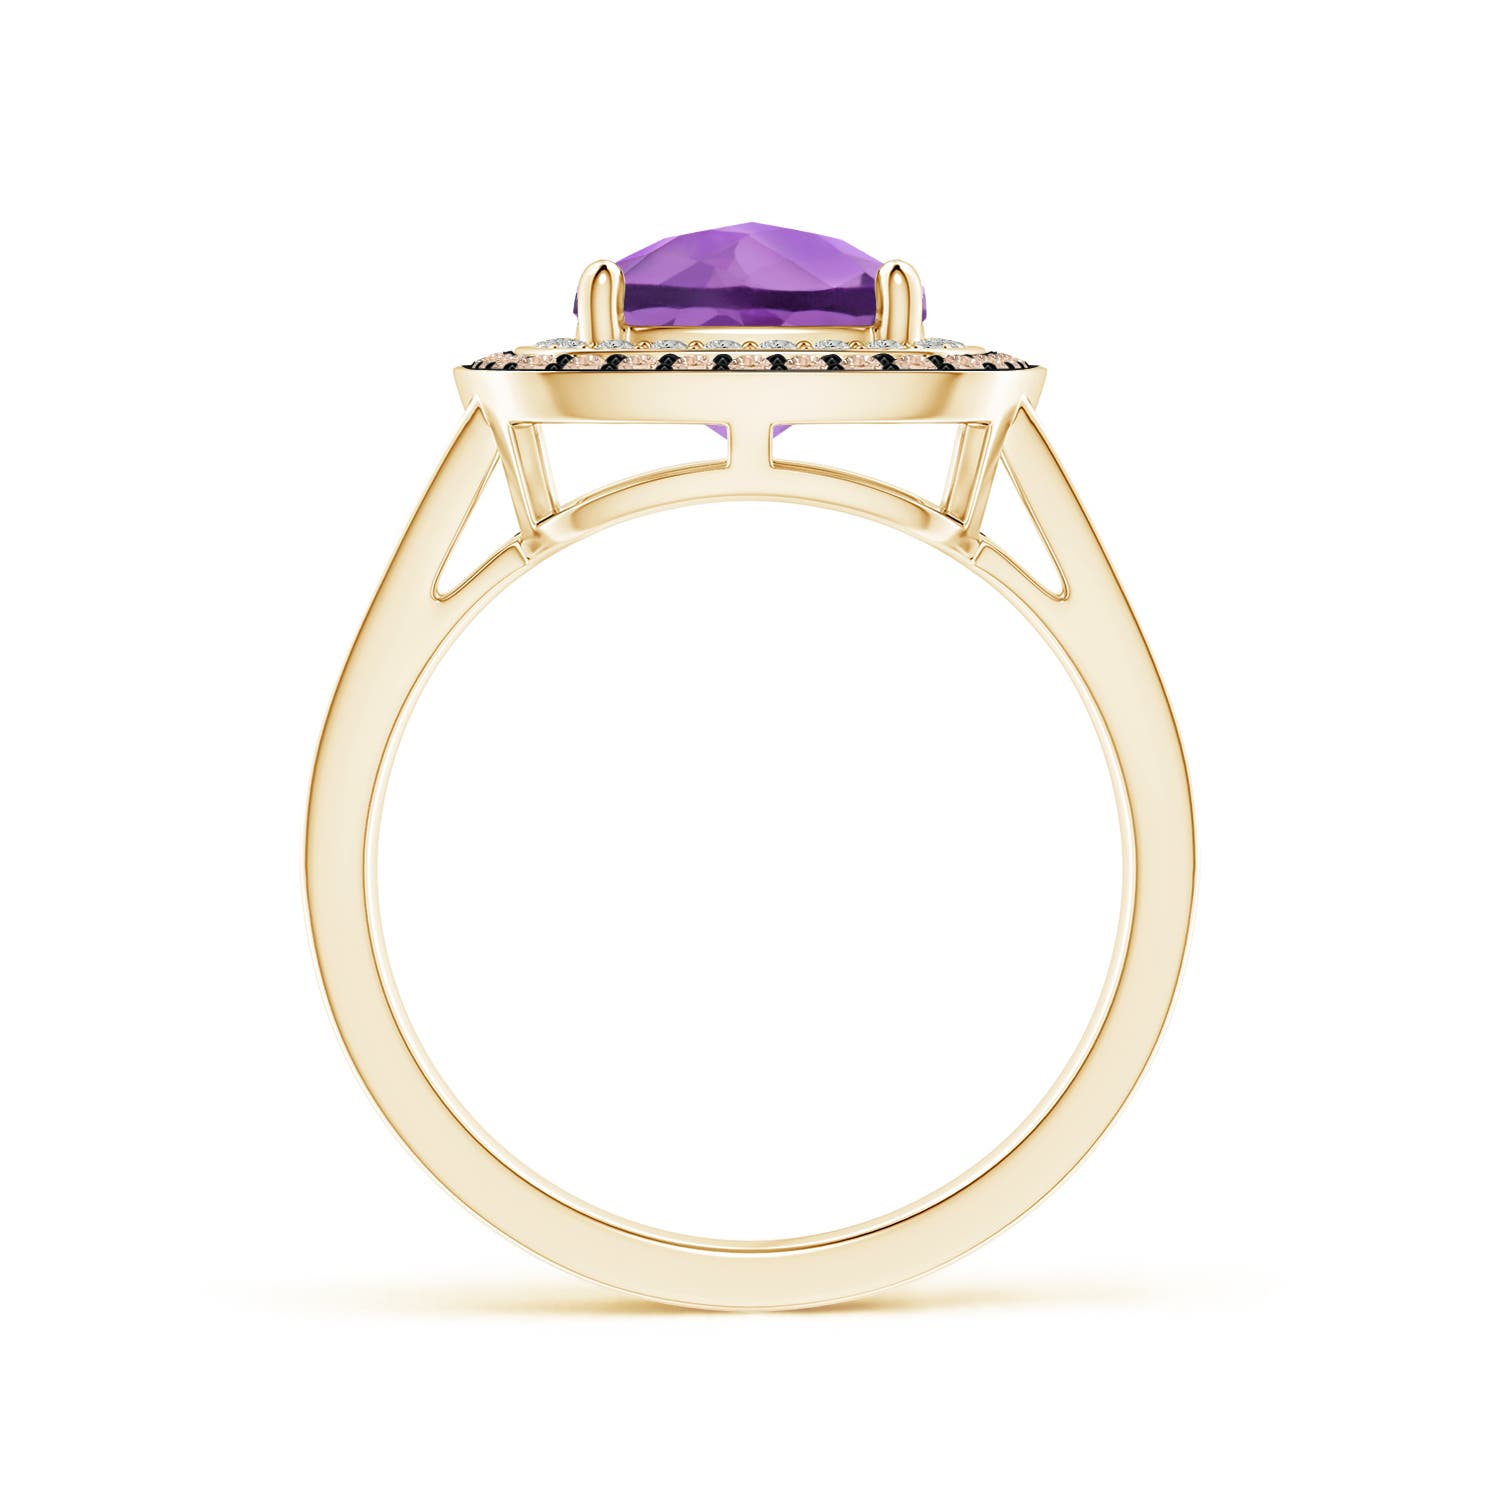 A - Amethyst / 2.7 CT / 14 KT Yellow Gold